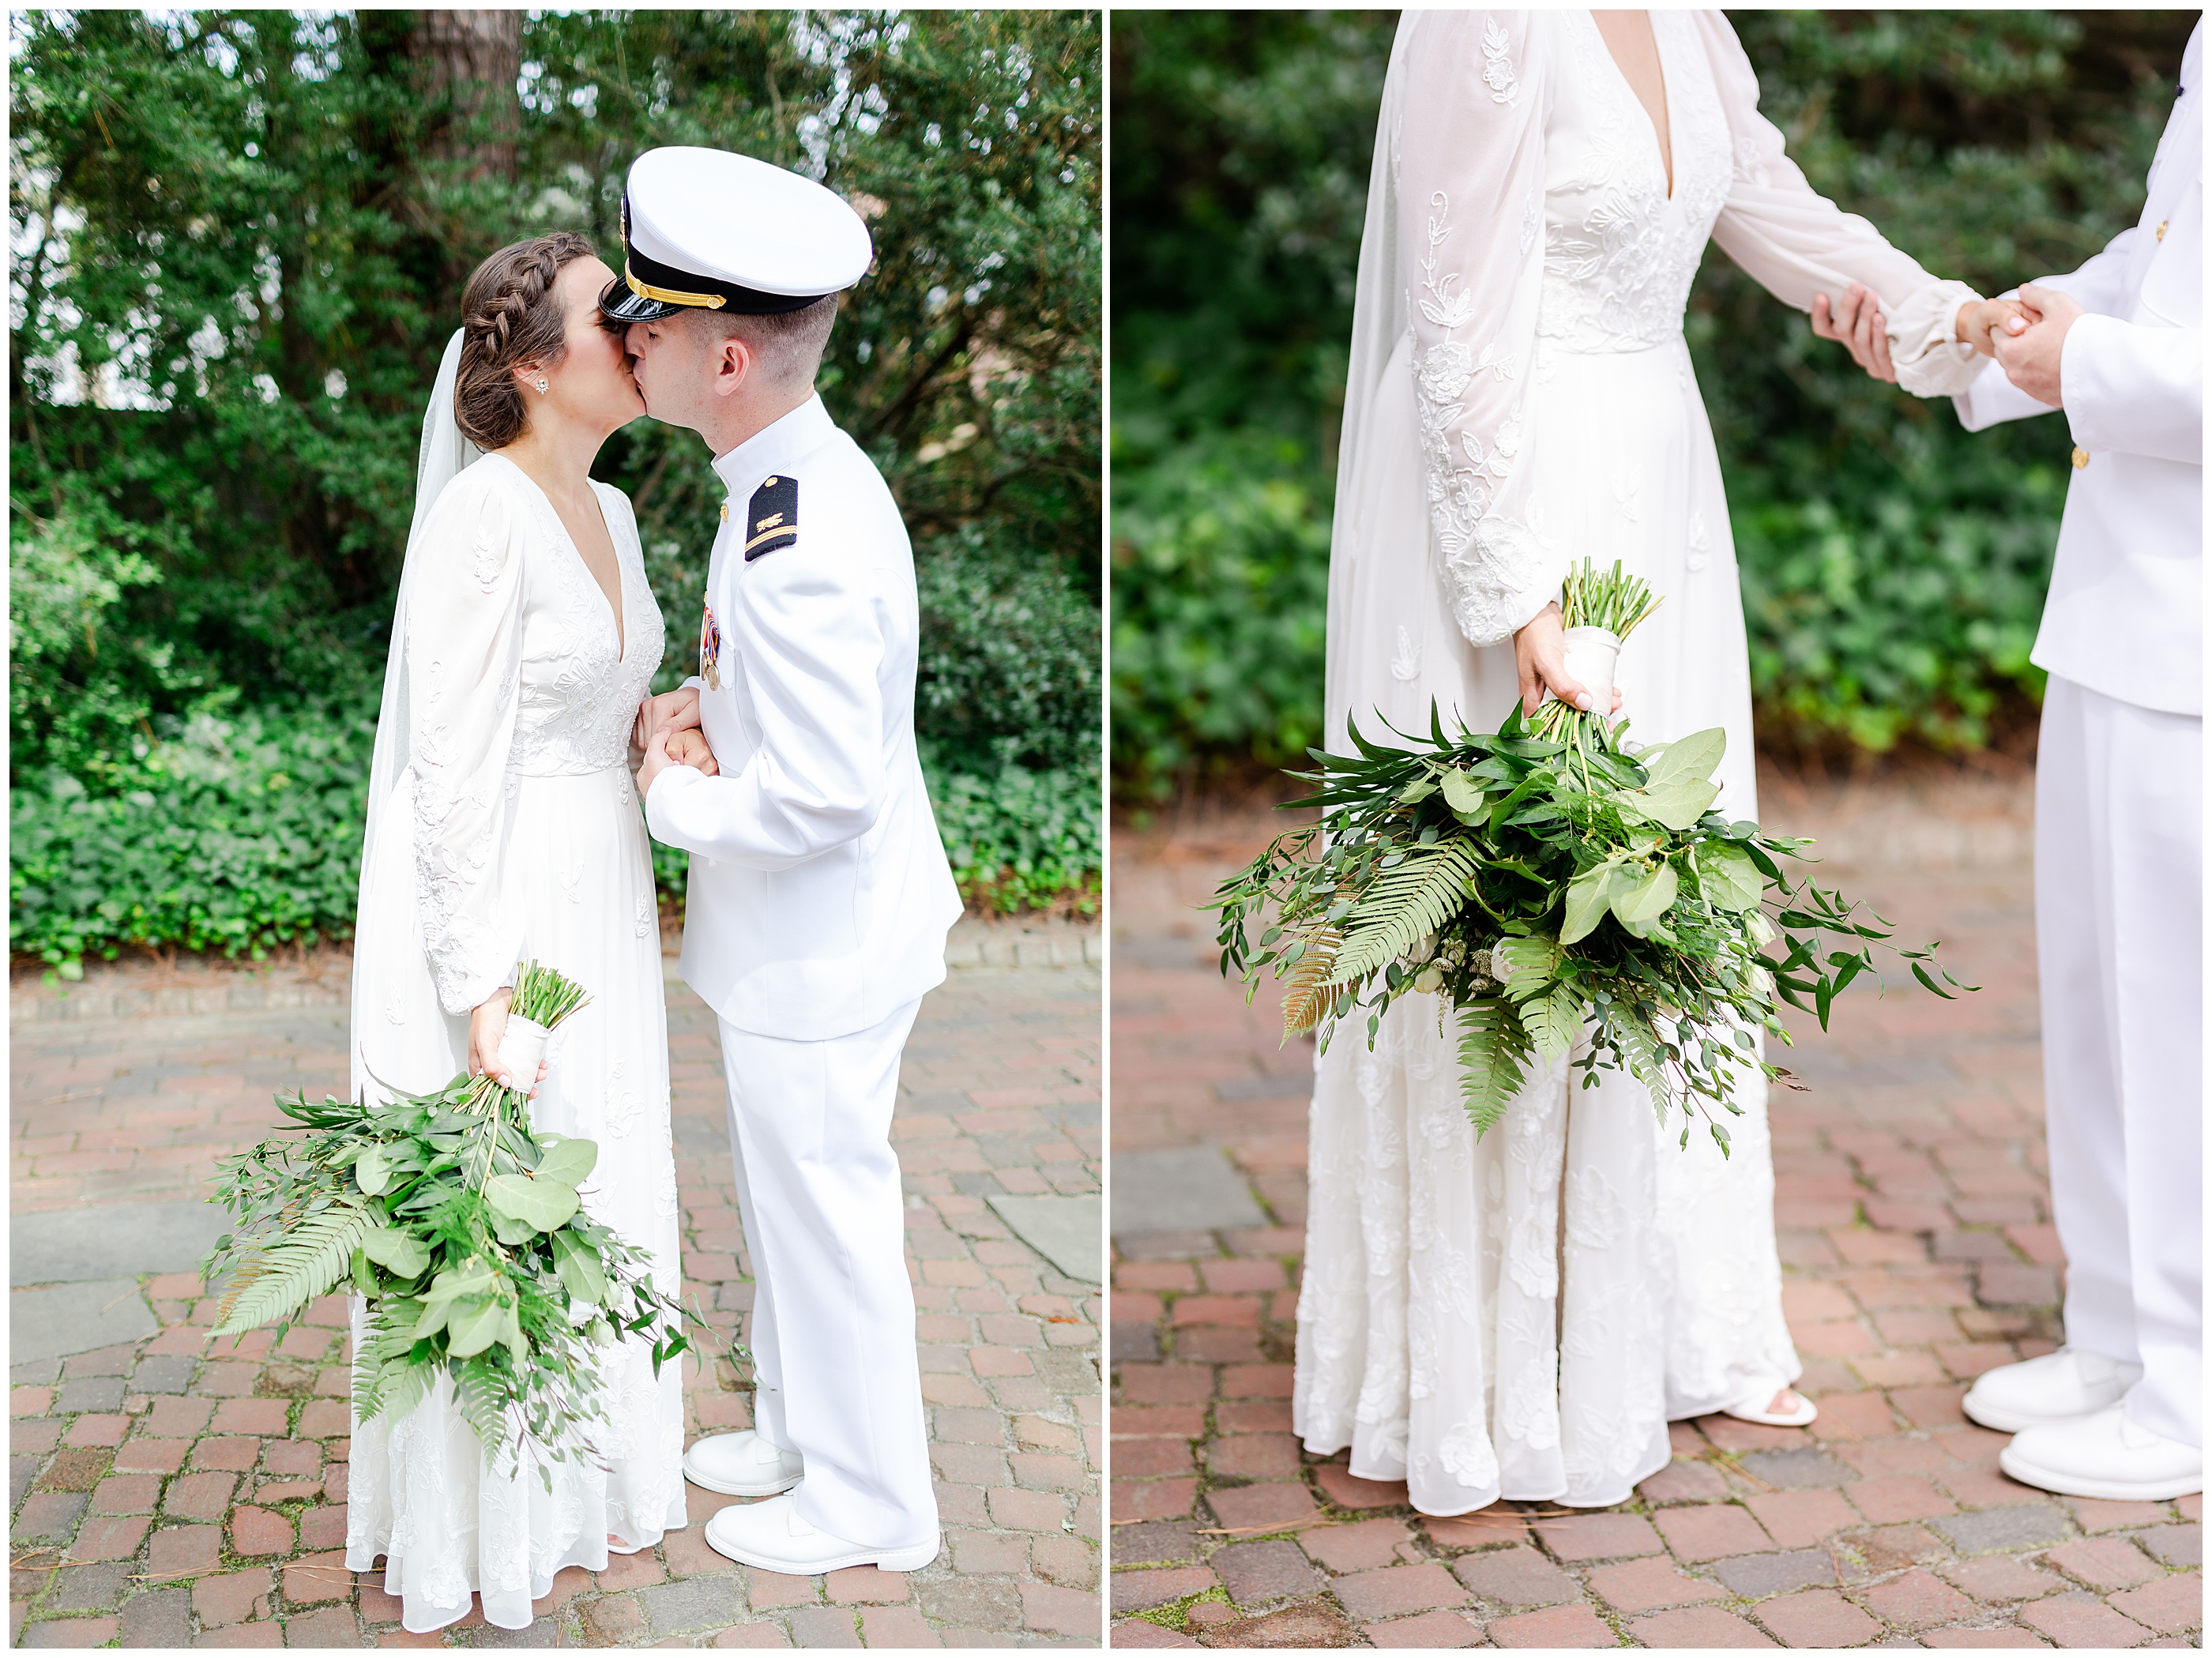 First Look photos at the Williamsburg Inn by Luke and Ashley Photography